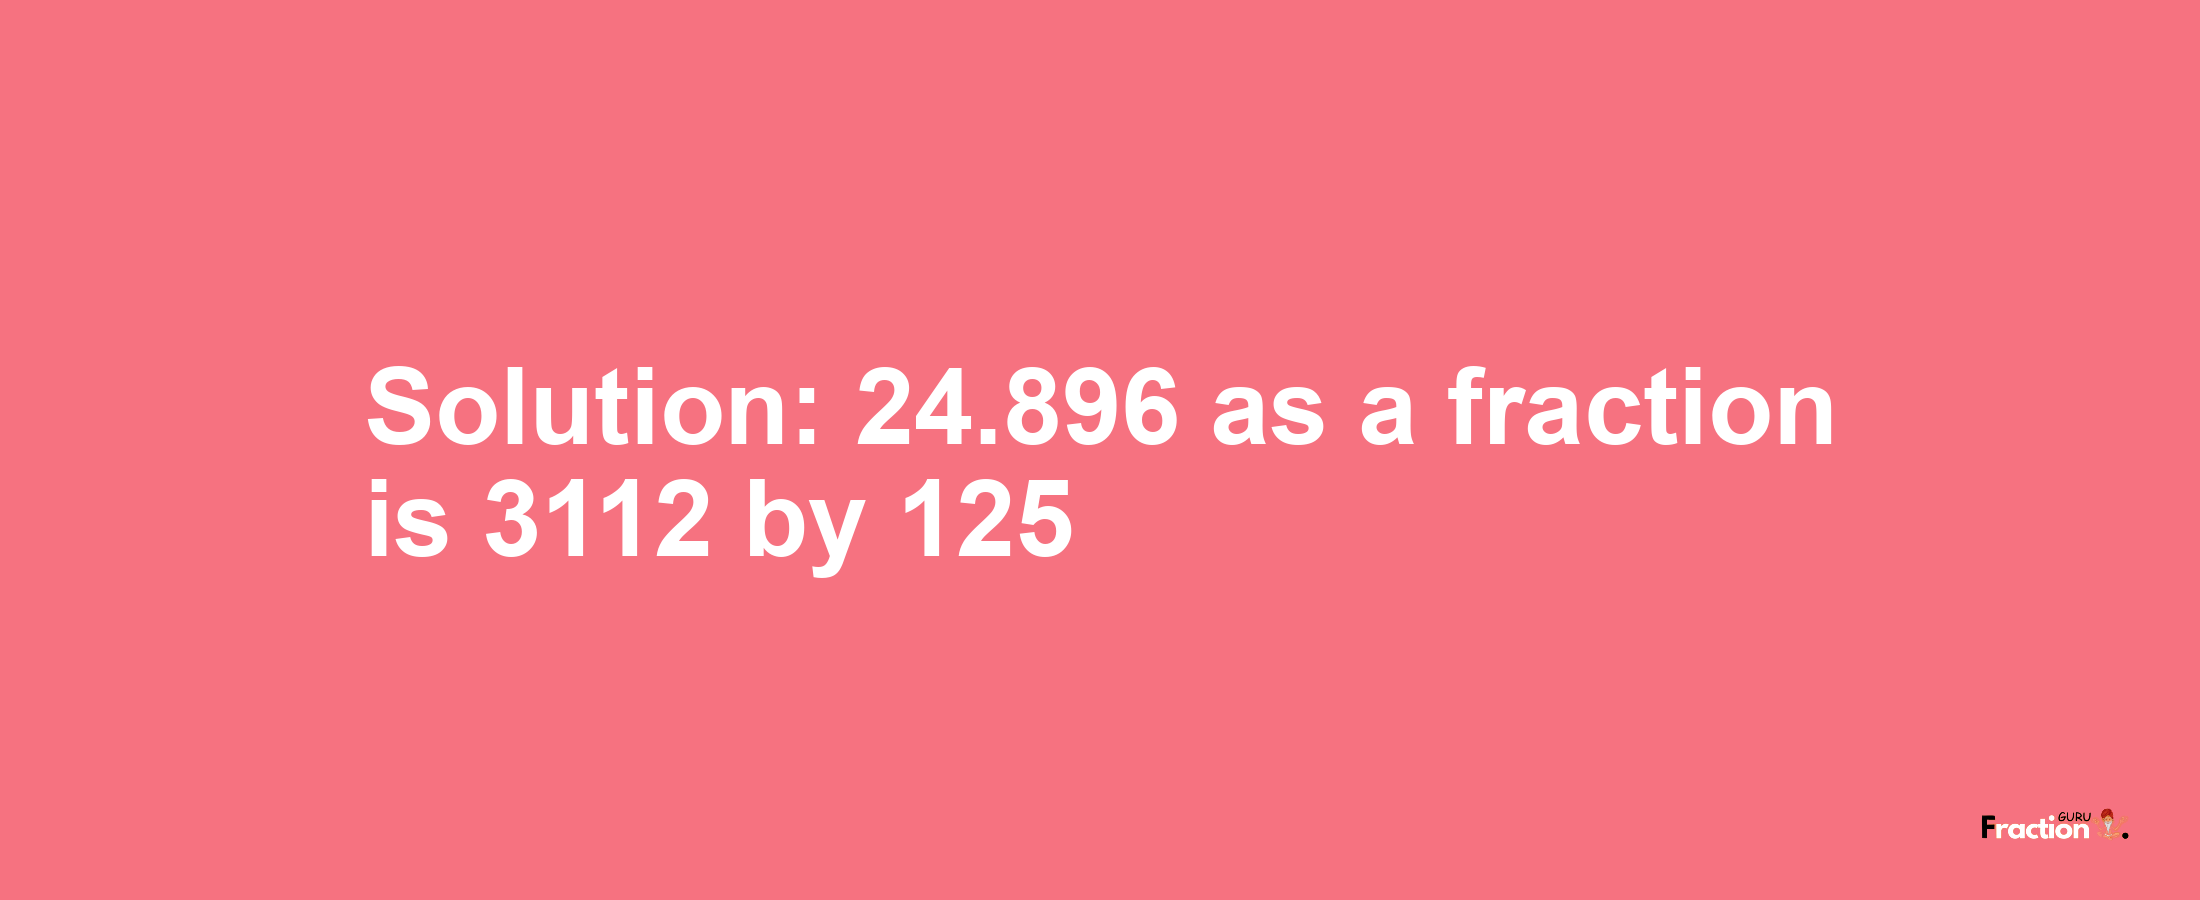 Solution:24.896 as a fraction is 3112/125